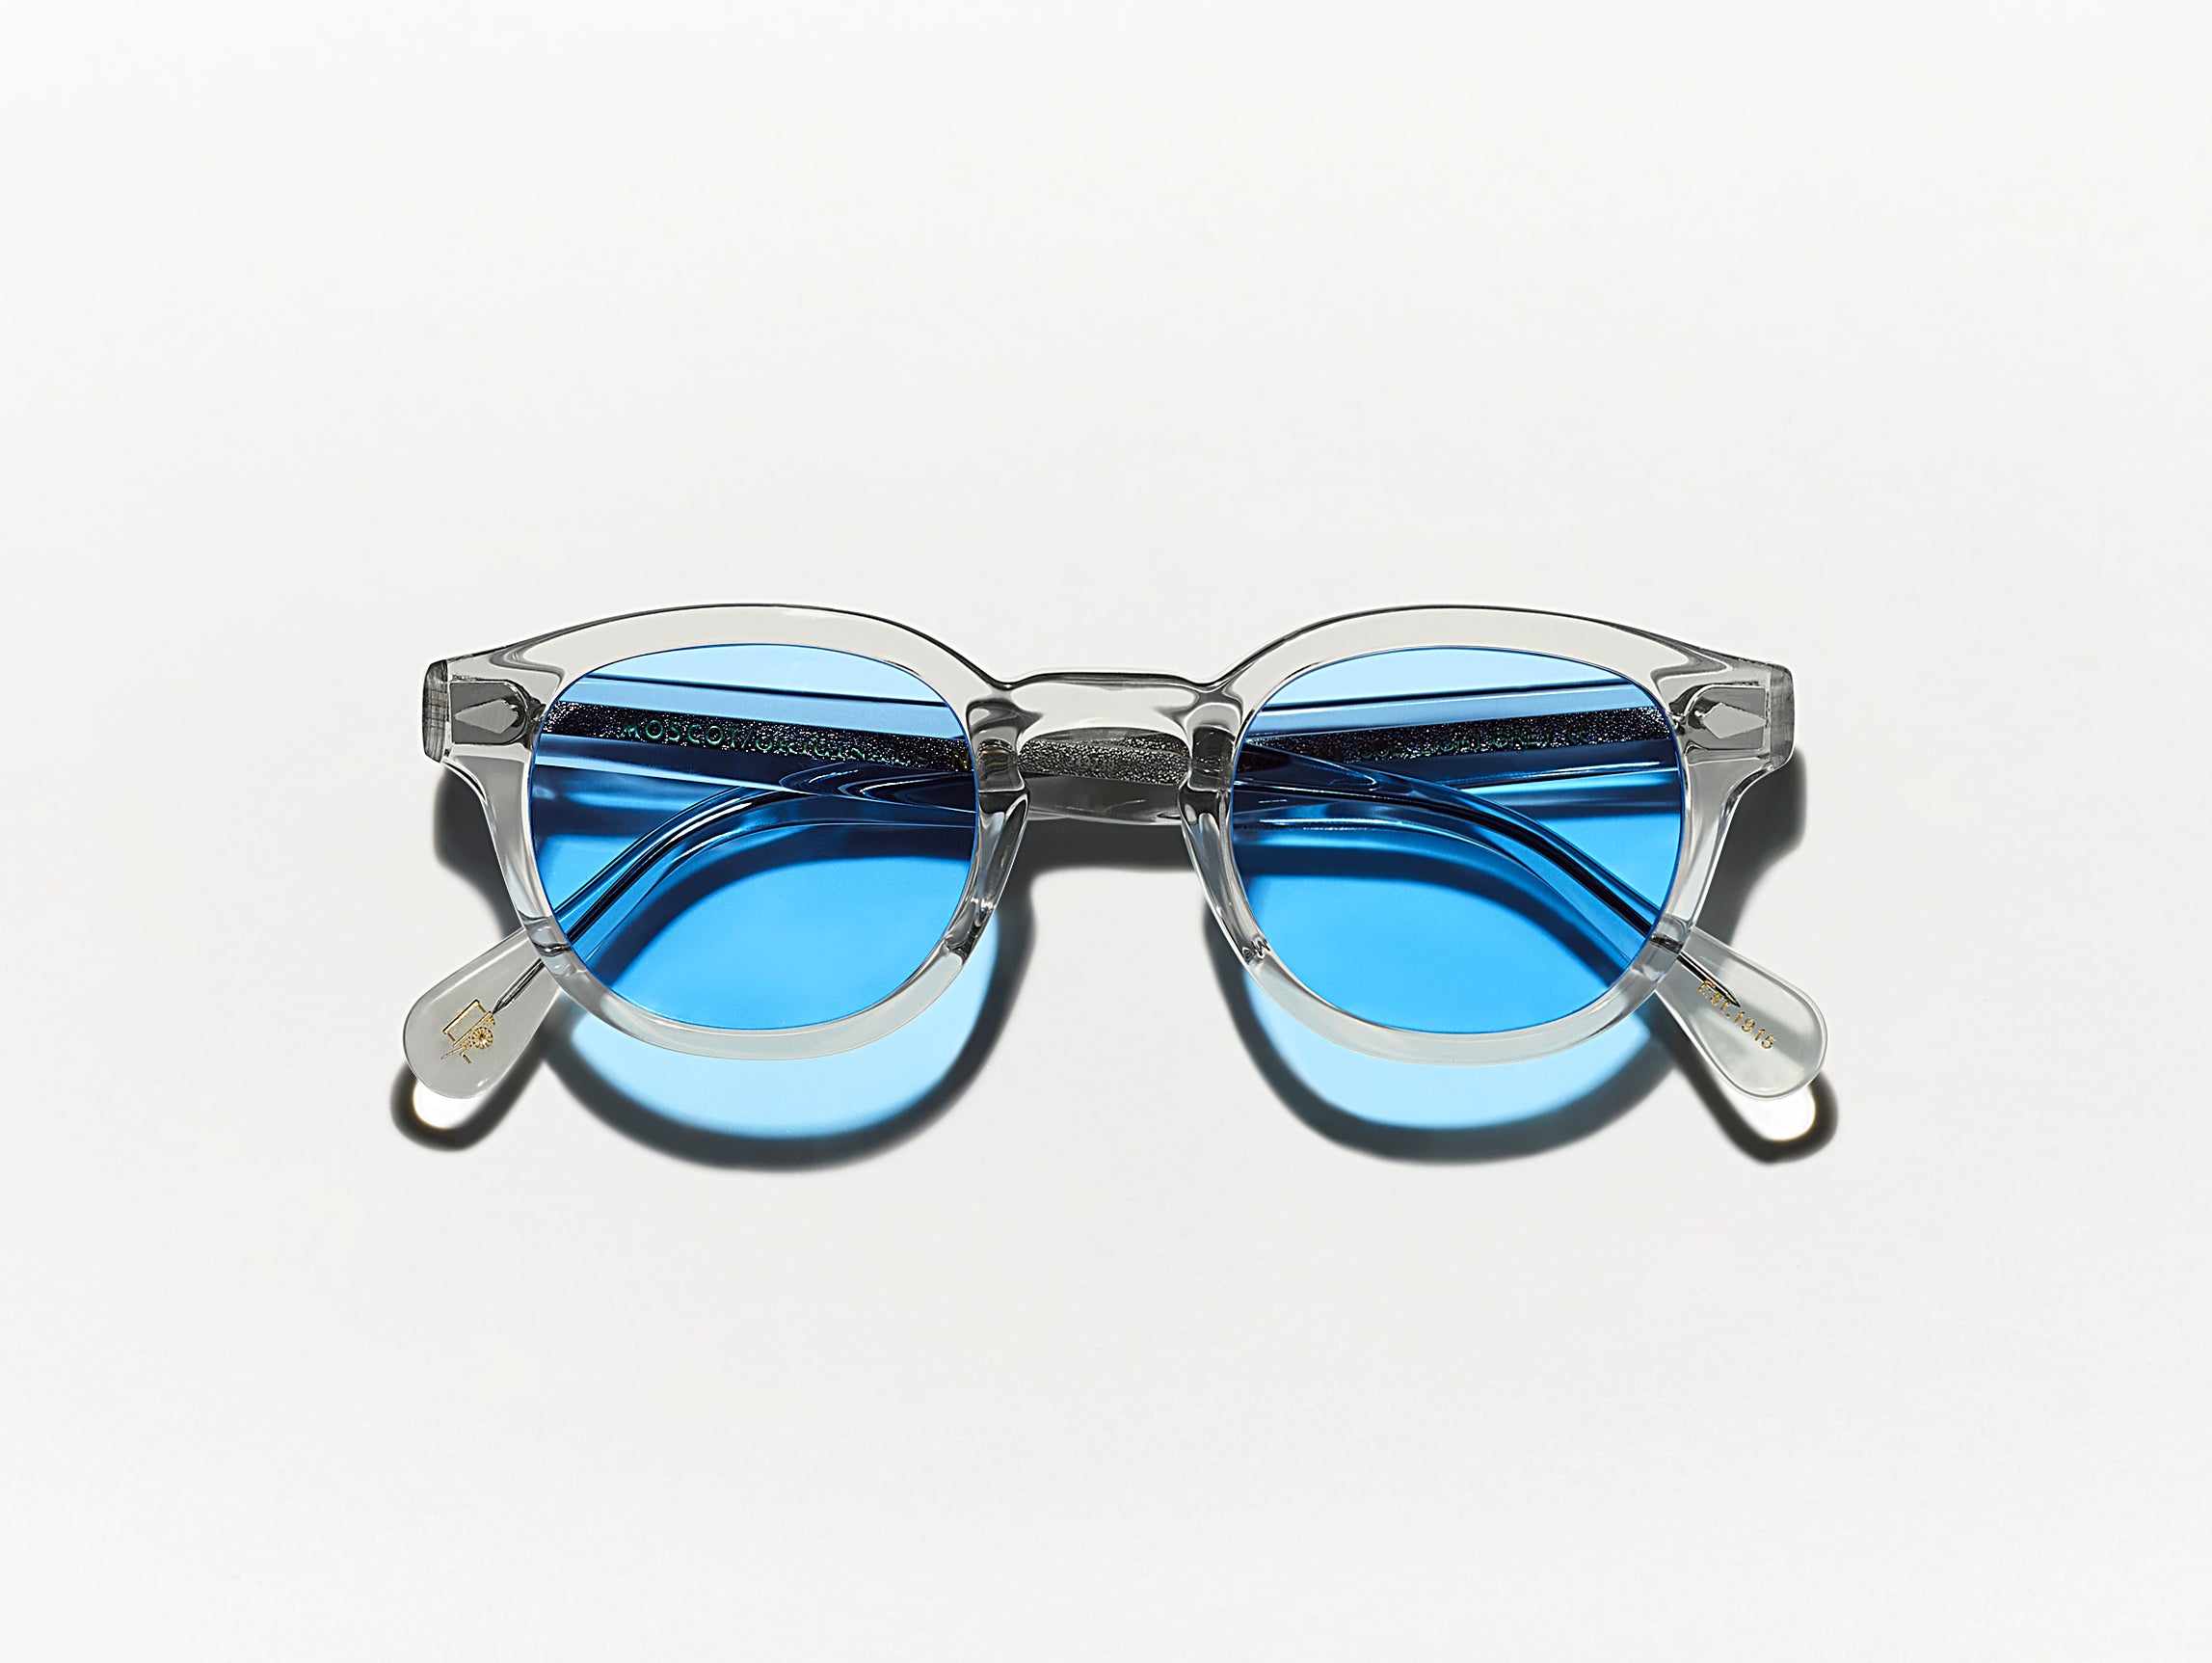 The LEMTOSH Light Grey with Celebrity Blue Tinted Lenses